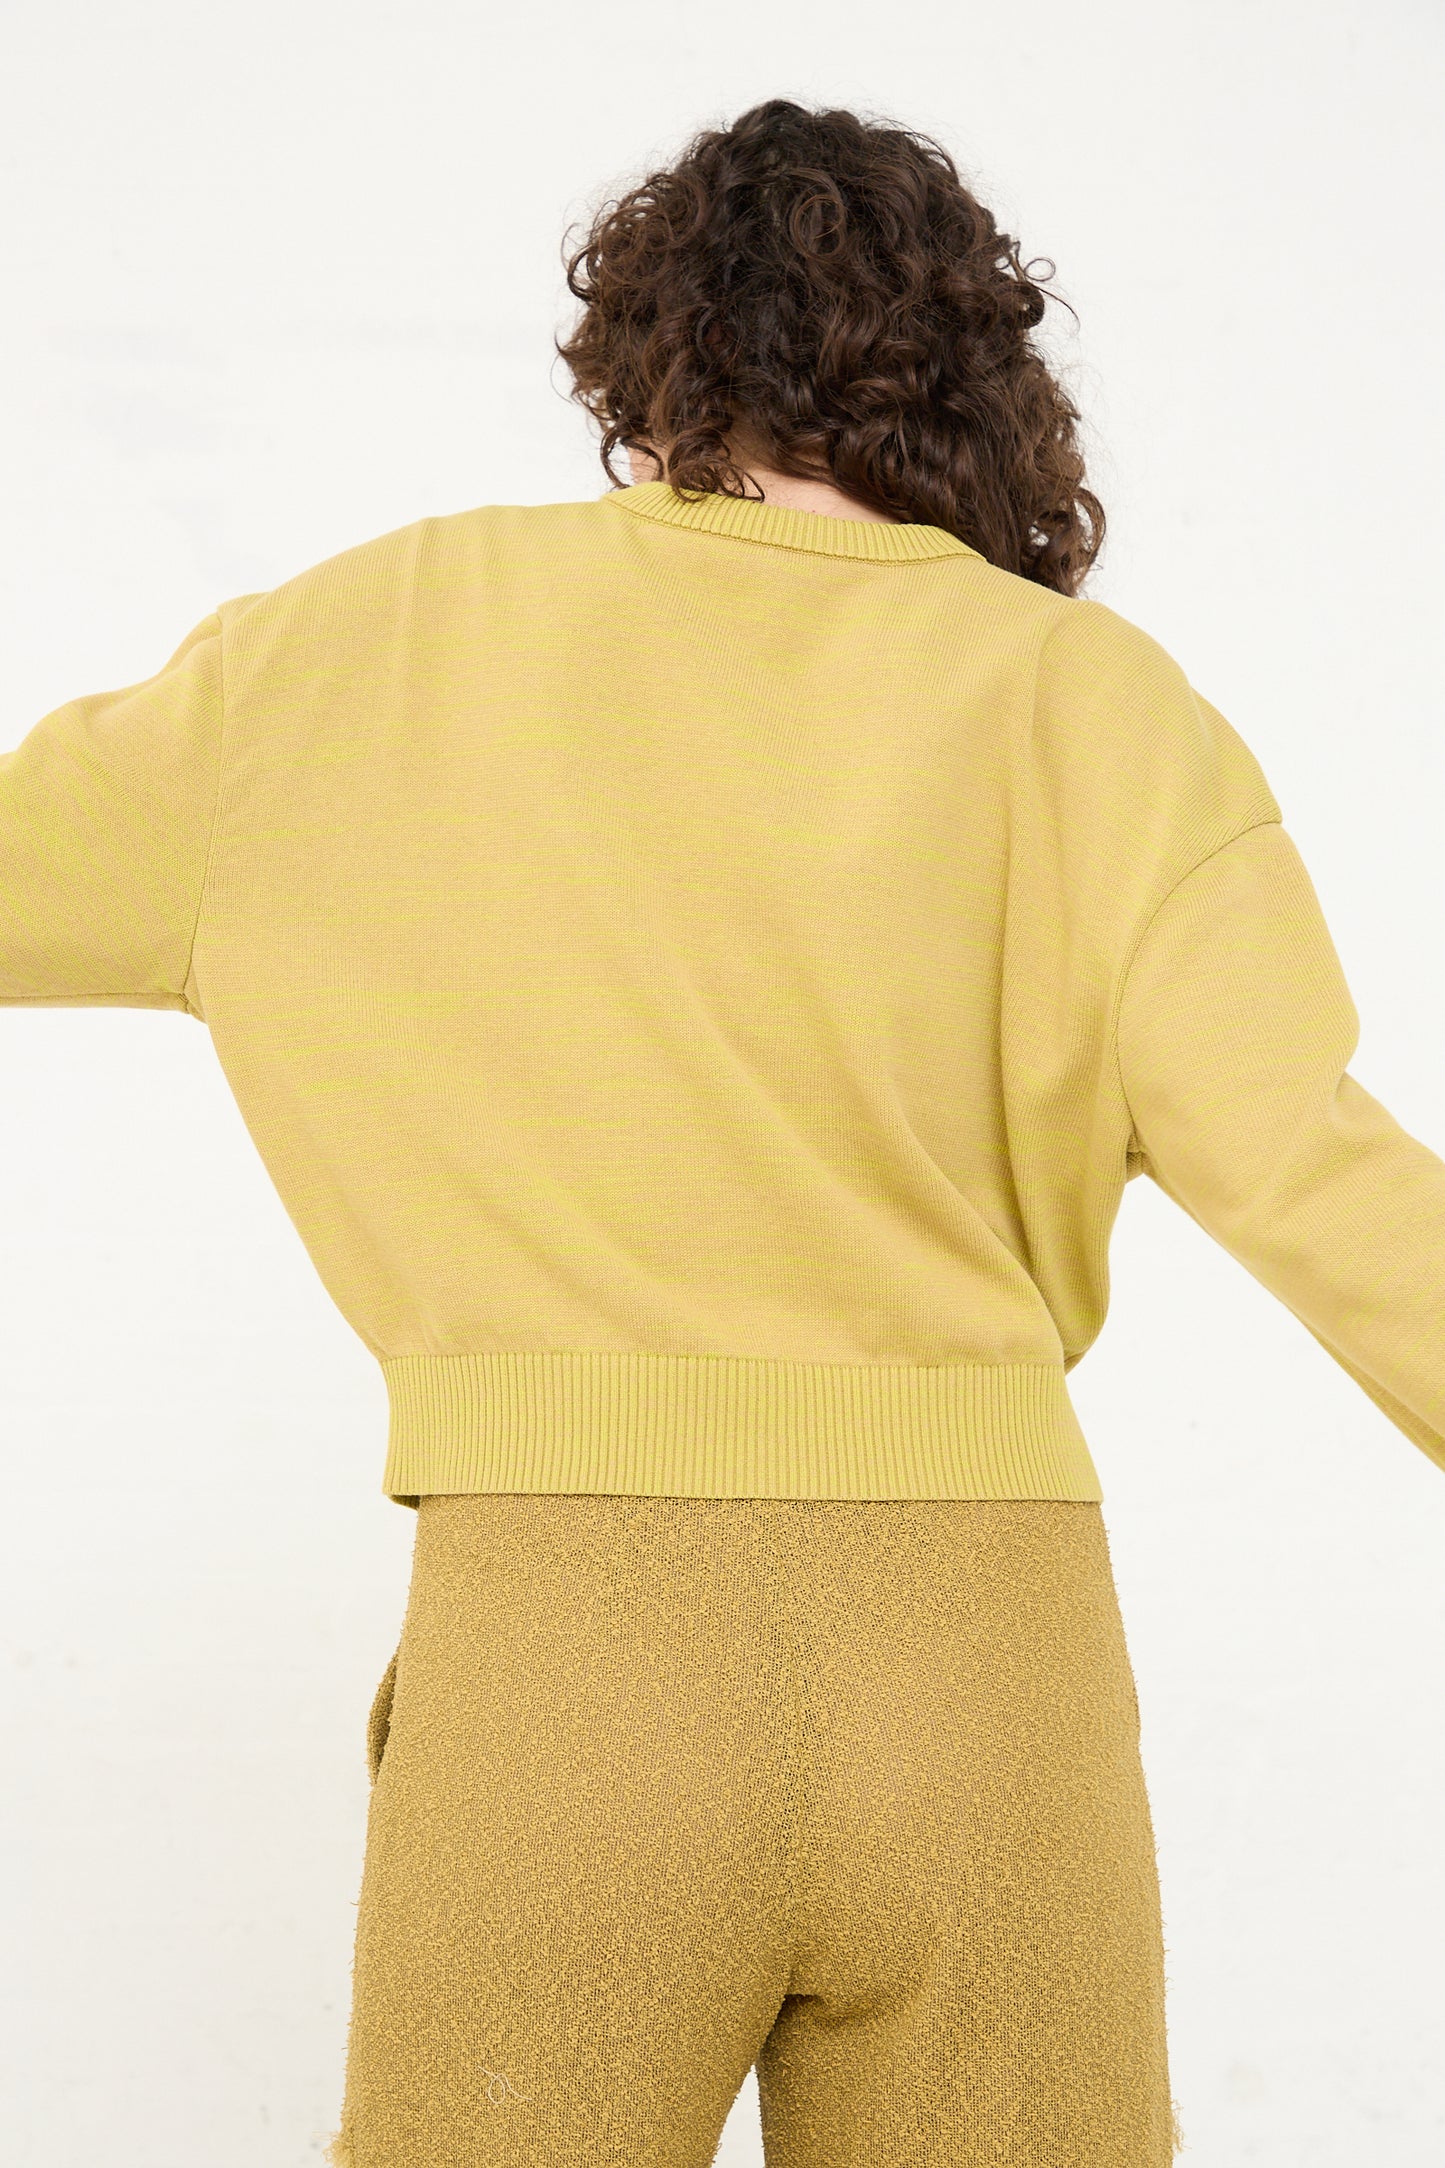 The back of a woman wearing a yellow knit Cotton Boxy Sweater in Curry by Veronique Leroy.